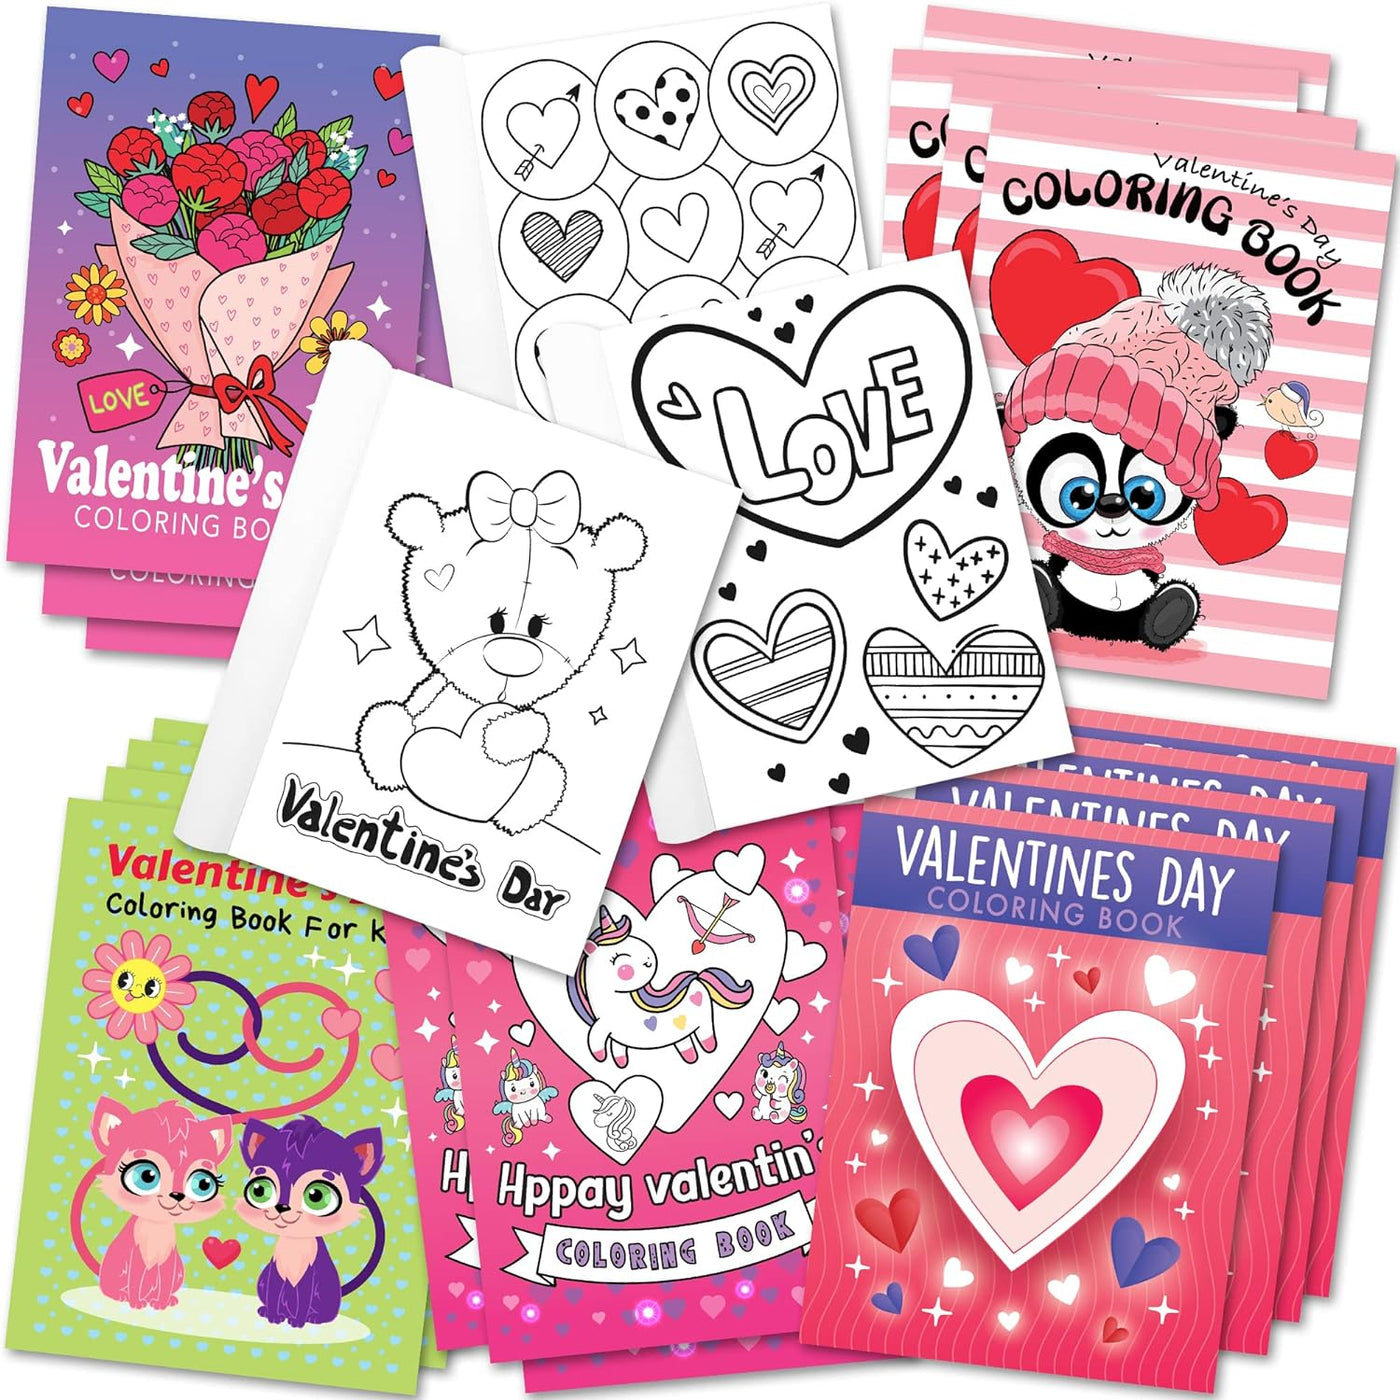 Valentines Day Coloring Books for Kids Bulk, Pack of 20, Small Color Booklets in 5 Designs, Valentine Party Favors For Kids, Educational Valentine Gifts For Kids Classroom, Valentine Treats For Kids